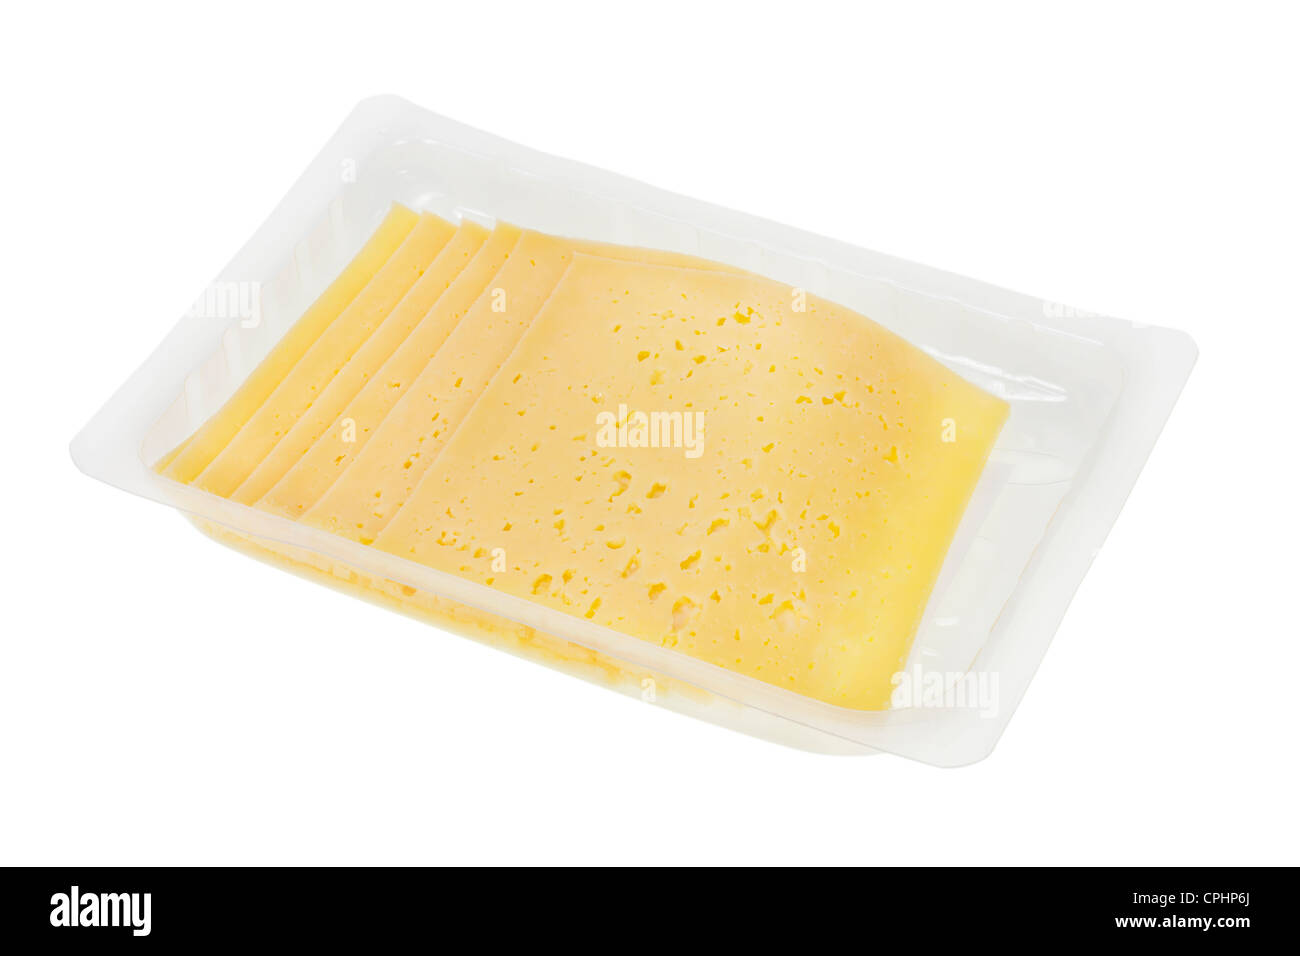 Download Plastic Transparent Container With Sliced Sheets Of Yellow Cheese Stock Photo Alamy Yellowimages Mockups